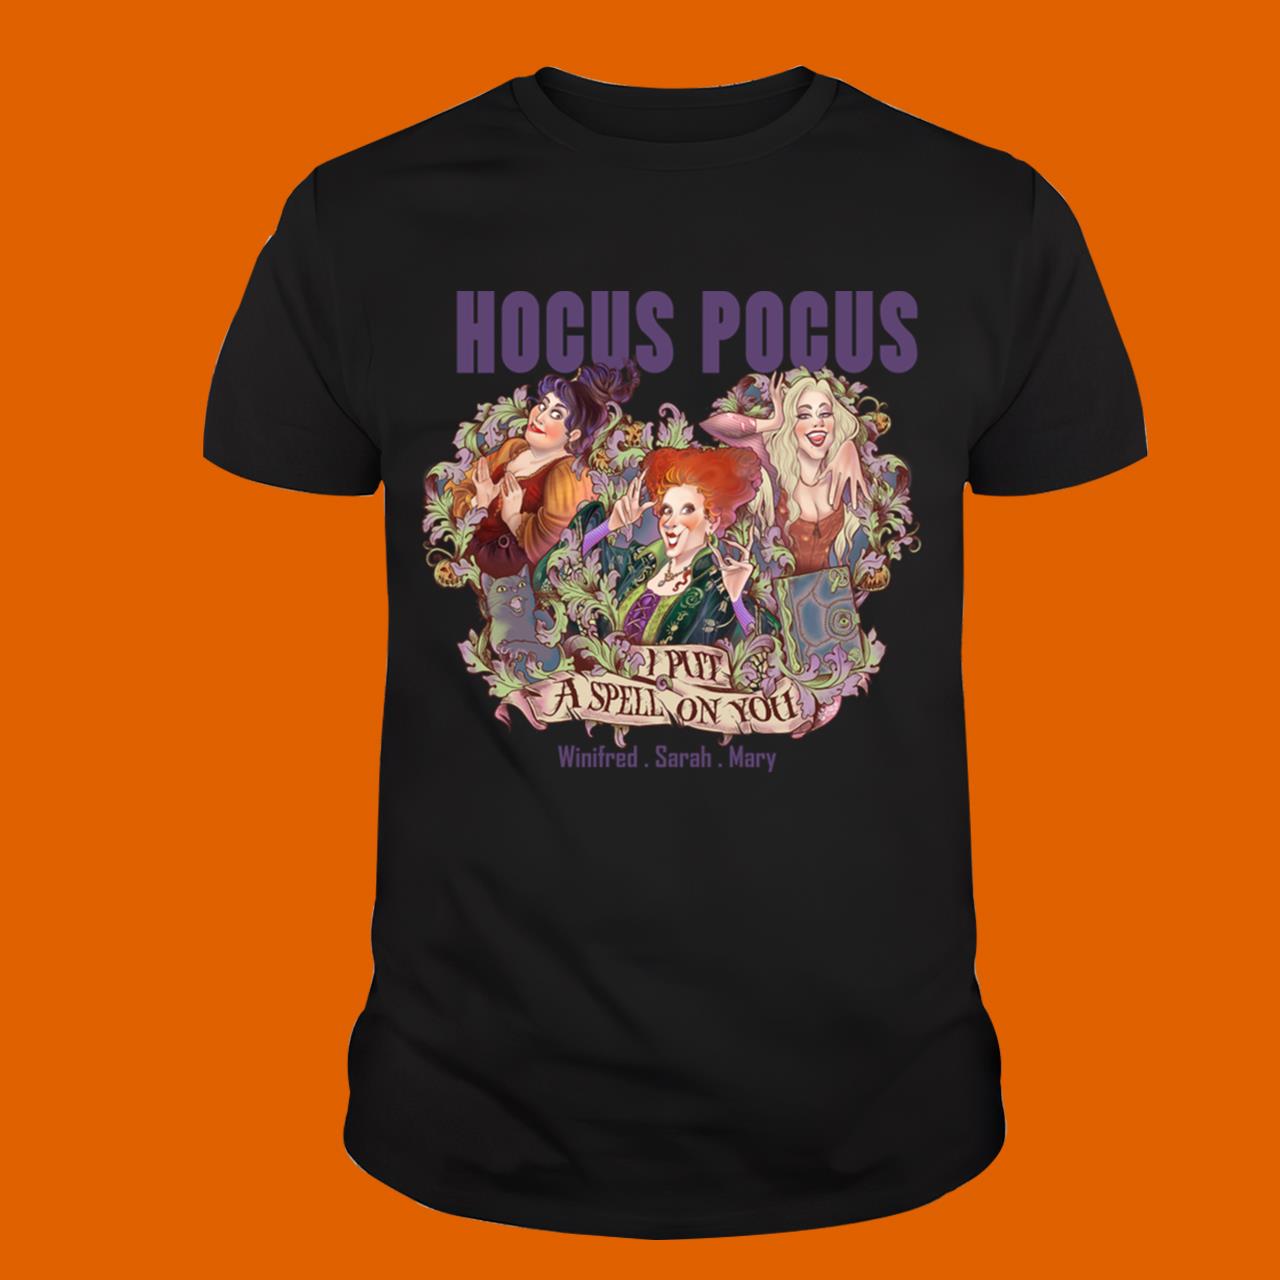 Hocus Pocus A Spell On You T-Shirt